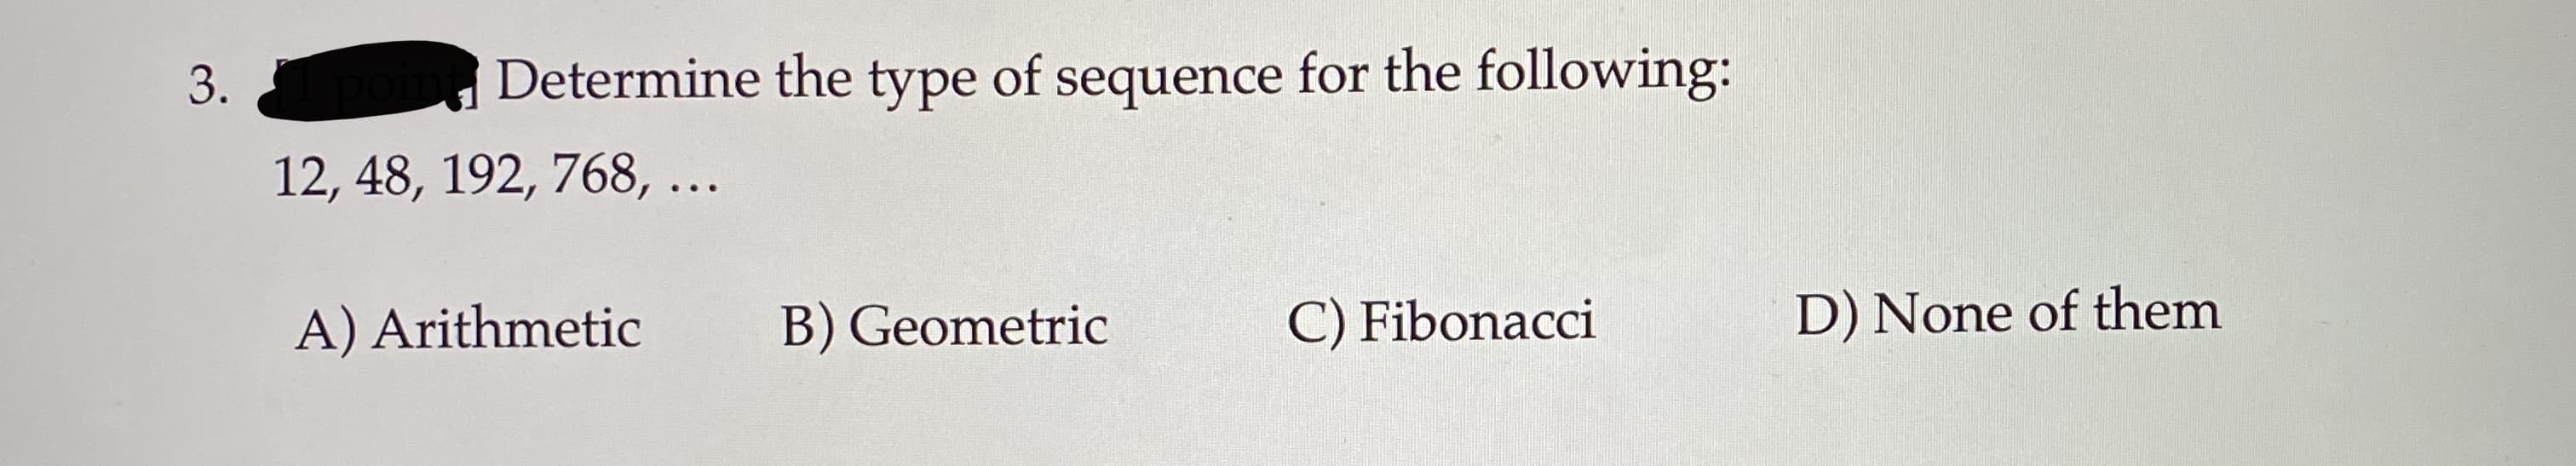 Determine the type of sequence for the following:
3.
12, 48, 192, 768, ...
B) Geometric
D) None of them
A) Arithmetic
C) Fibonacci
